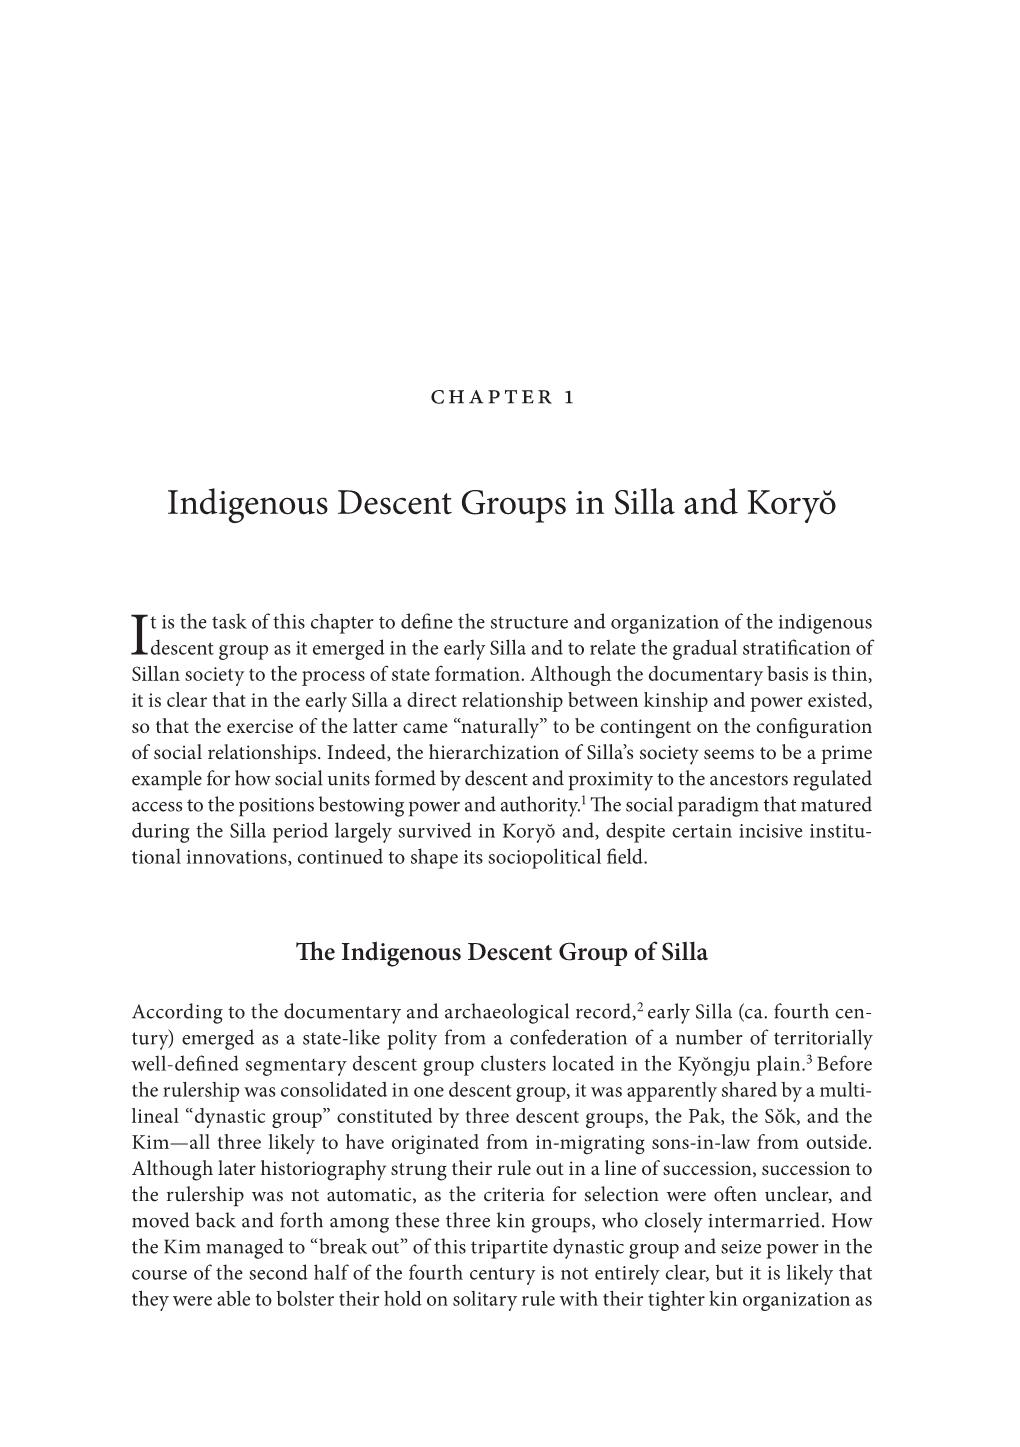 Indigenous Descent Groups in Silla and Koryŏ